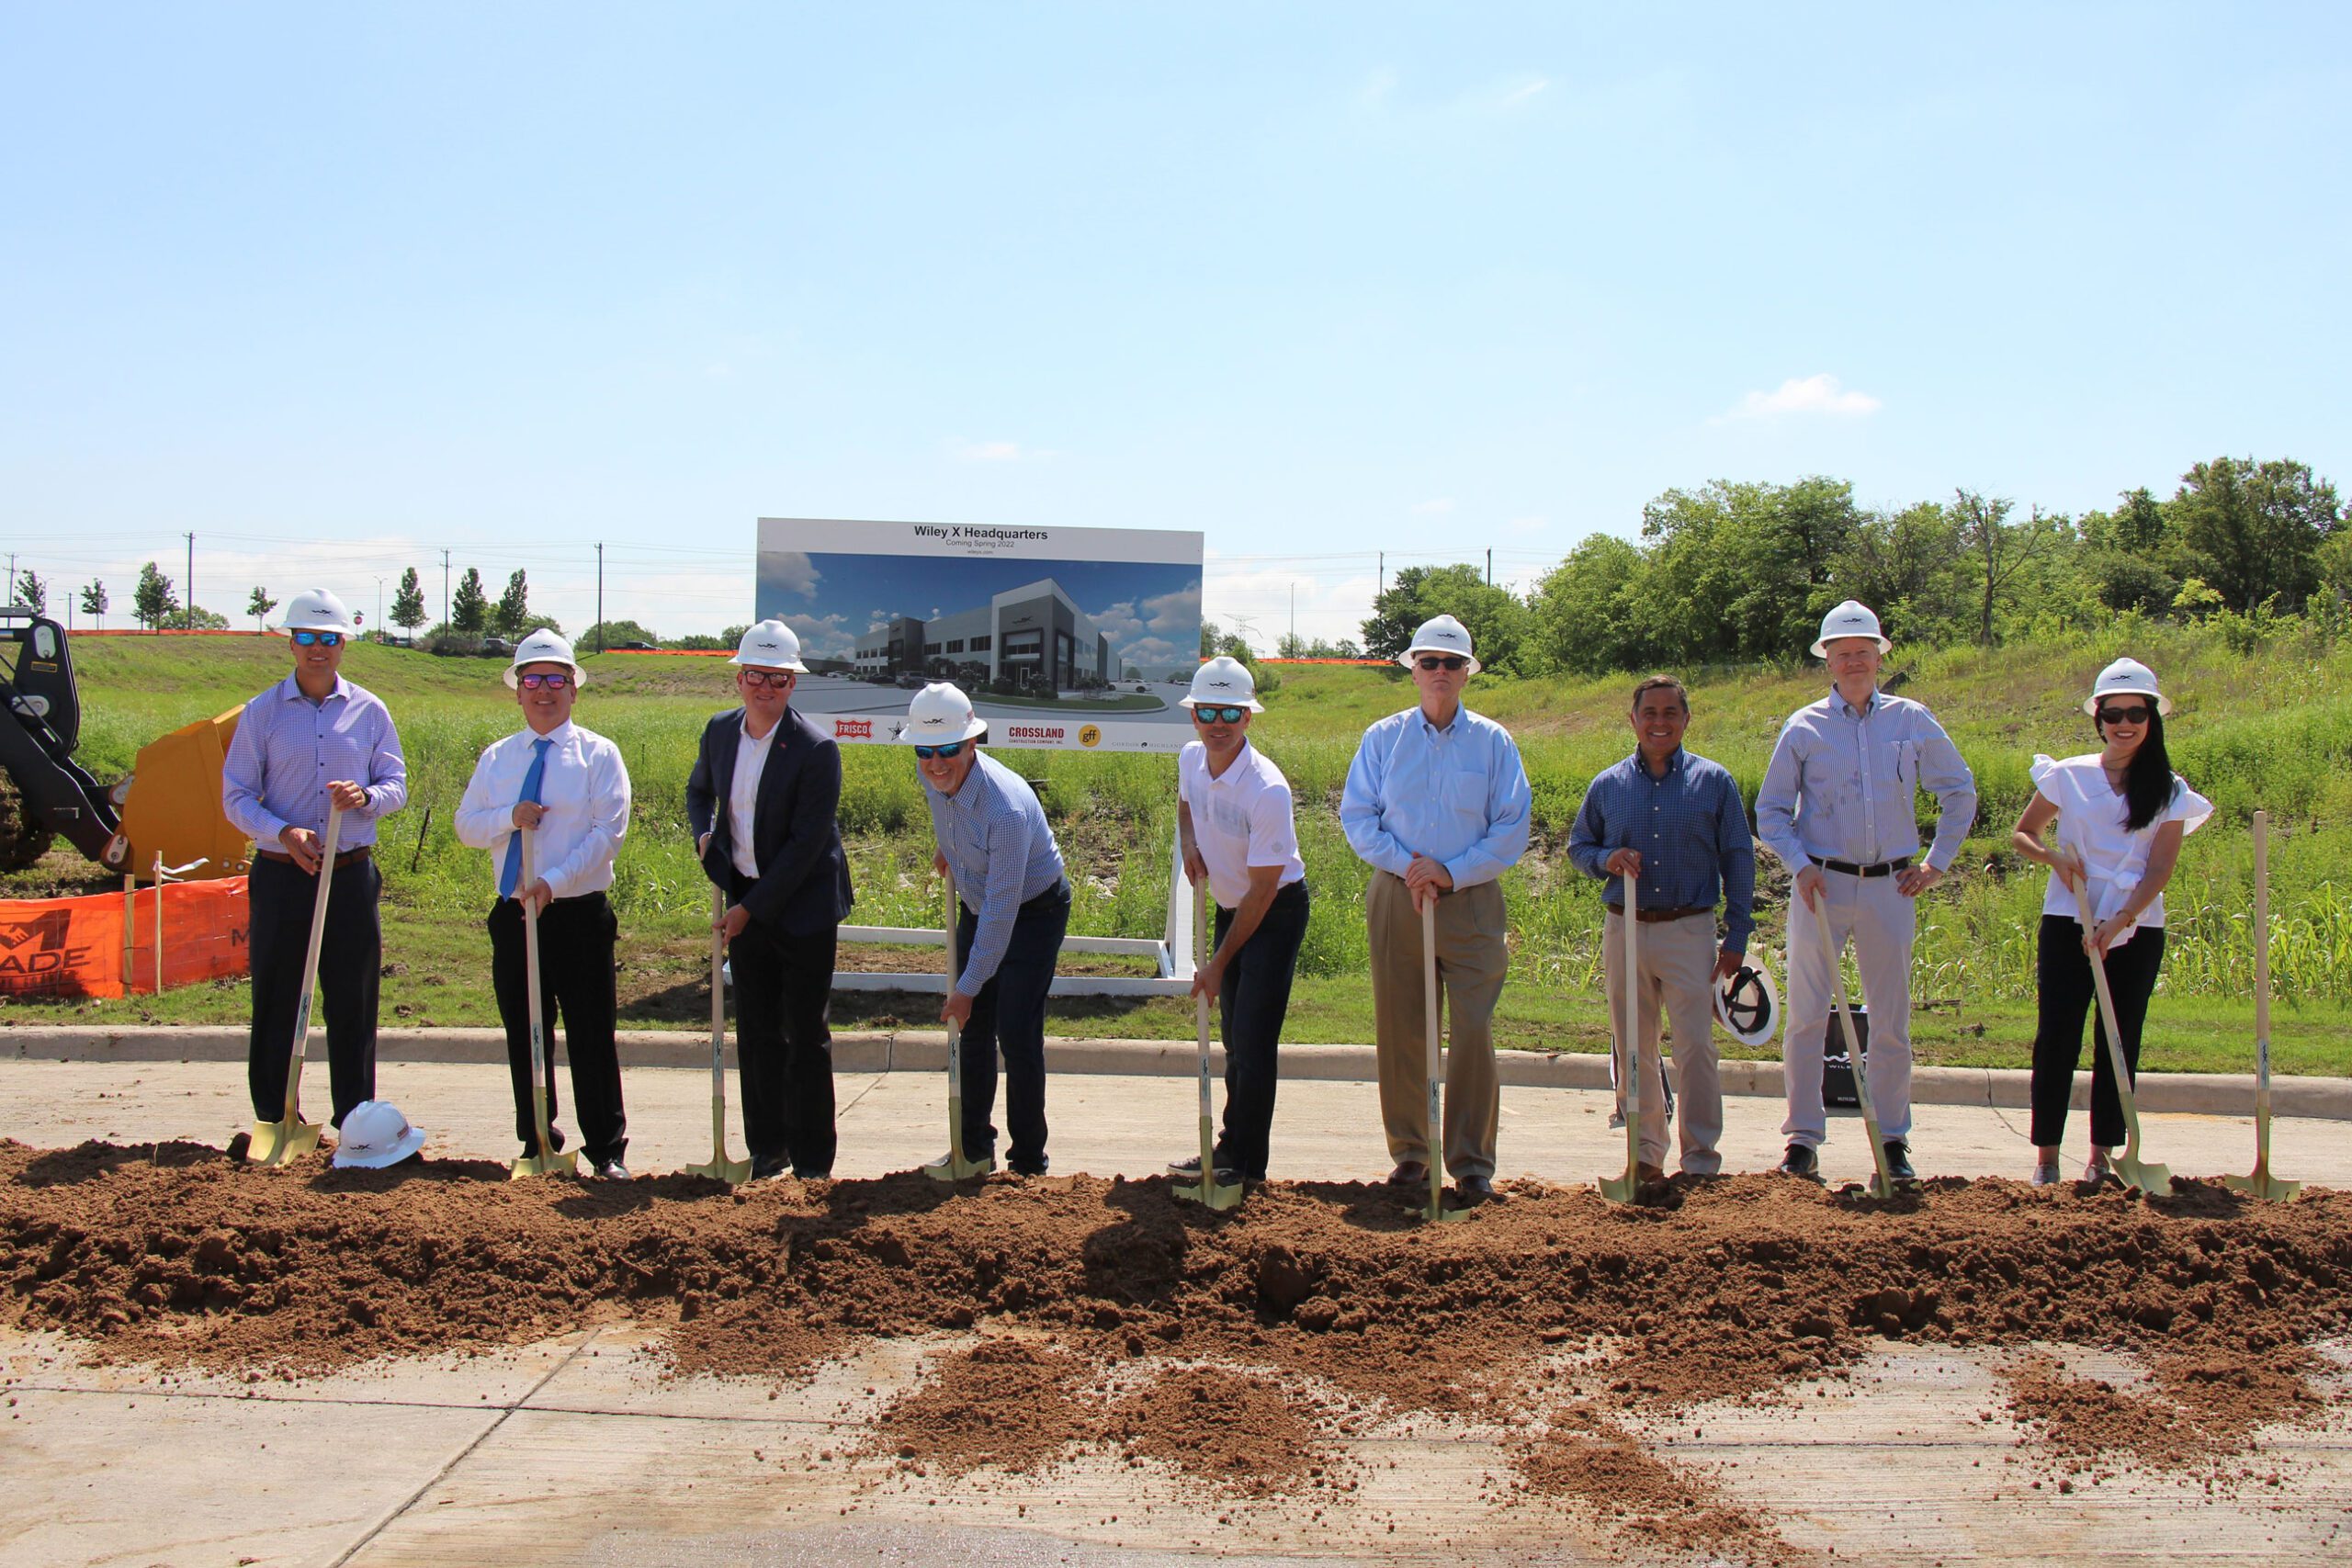 Wiley X Groundbreaking crew at New Frisco HQ.